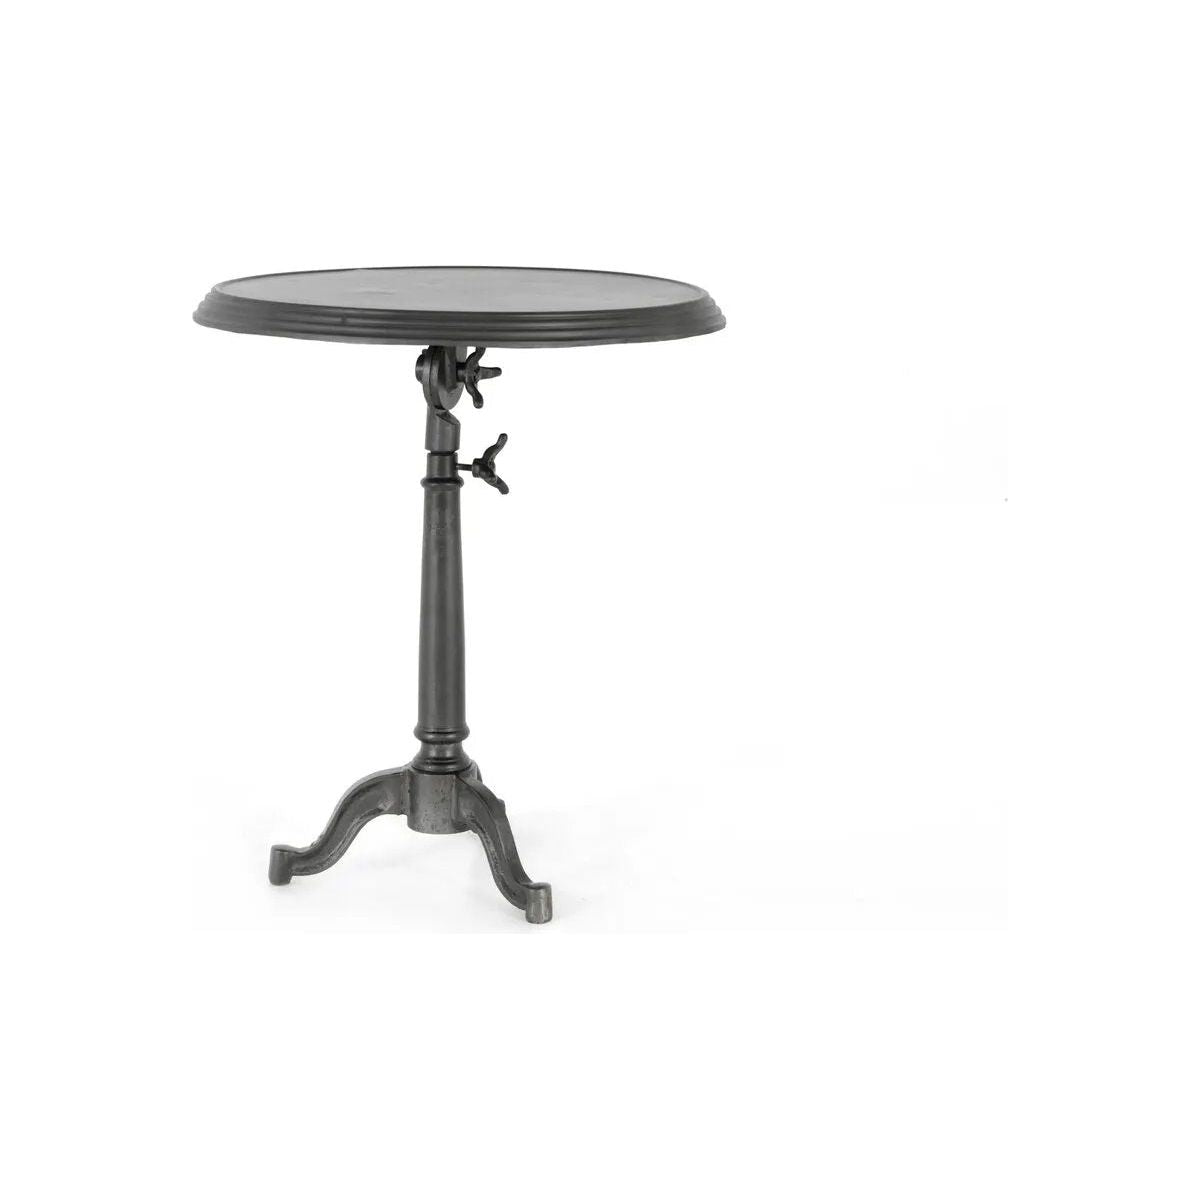 Crafted in iron with a carbon finish, this adjustable table features a versatile top that oscillates, blending classic design with utility.Collection: Rockwel Amethyst Home provides interior design, new home construction design consulting, vintage area rugs, and lighting in the Park City metro area.